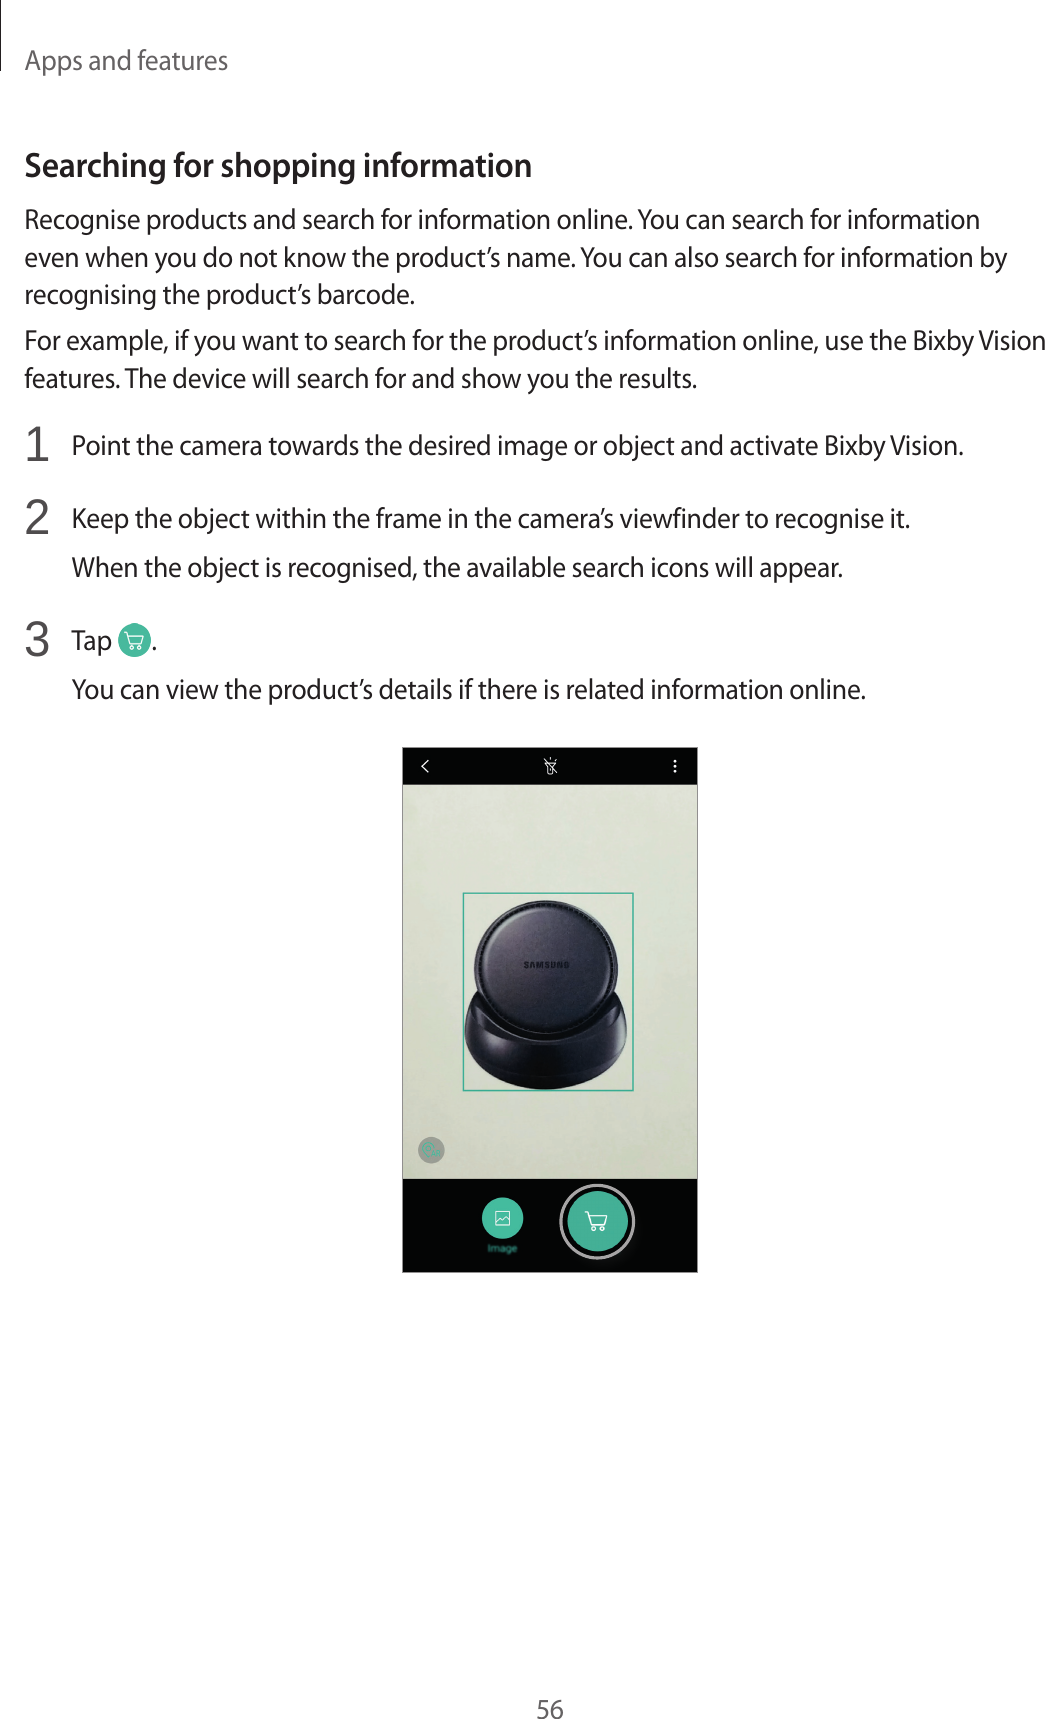 Apps and features56Searching for shopping informationRecognise products and search for information online. You can search for information even when you do not know the product’s name. You can also search for information by recognising the product’s barcode.For example, if you want to search for the product’s information online, use the Bixby Vision features. The device will search for and show you the results.1  Point the camera towards the desired image or object and activate Bixby Vision.2  Keep the object within the frame in the camera’s viewfinder to recognise it.When the object is recognised, the available search icons will appear.3  Tap  .You can view the product’s details if there is related information online.